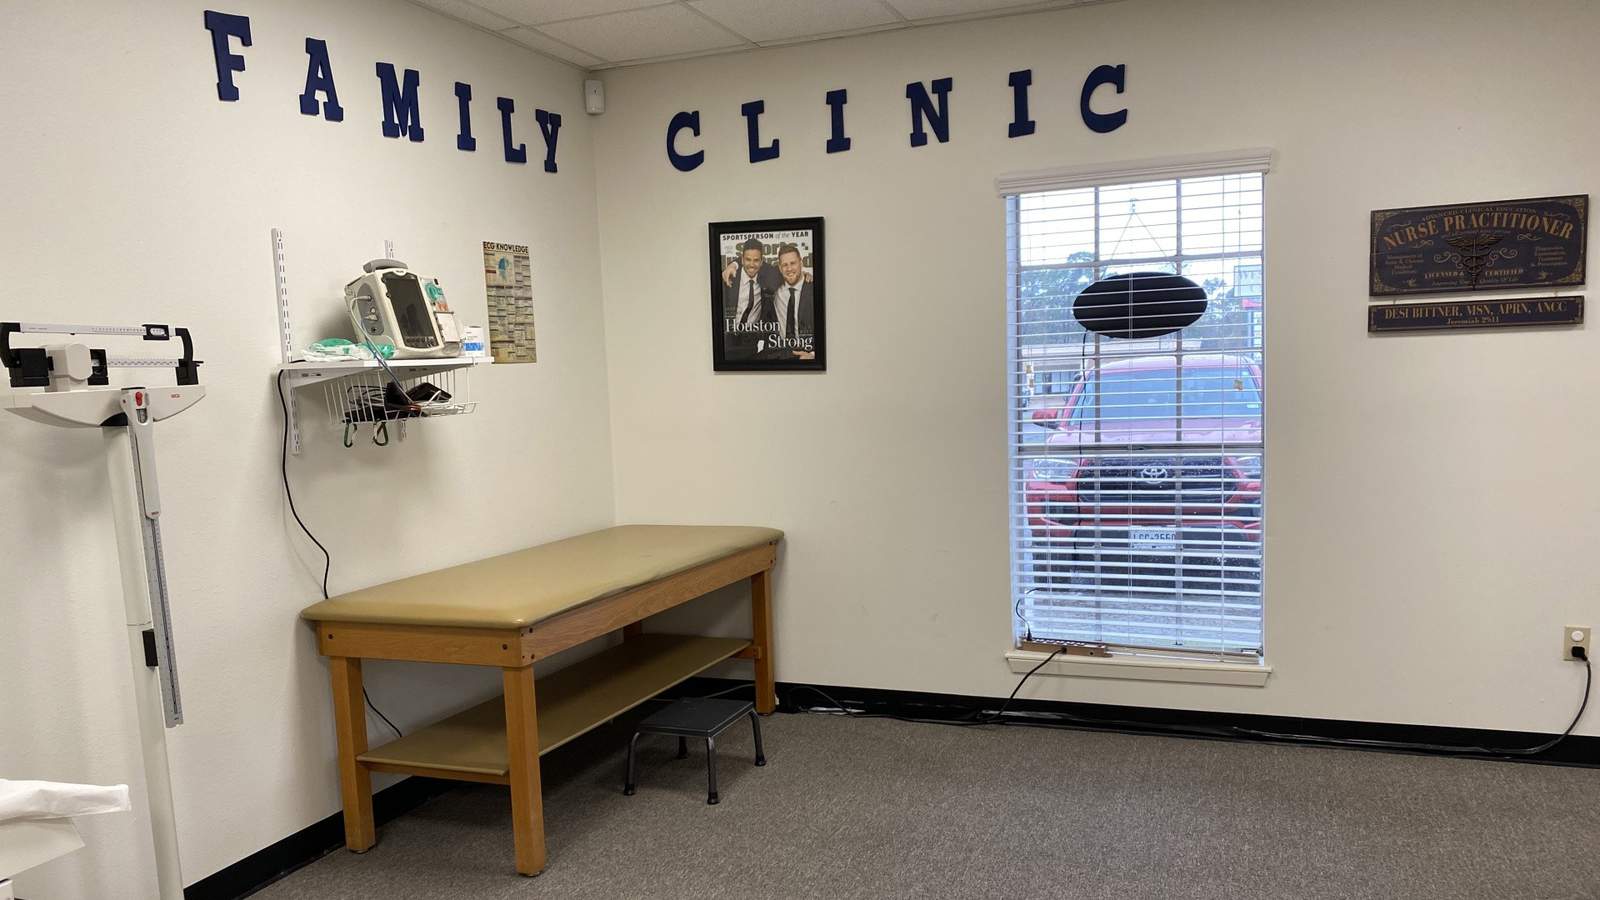 New family clinic in Conroe offers low cost health care ...